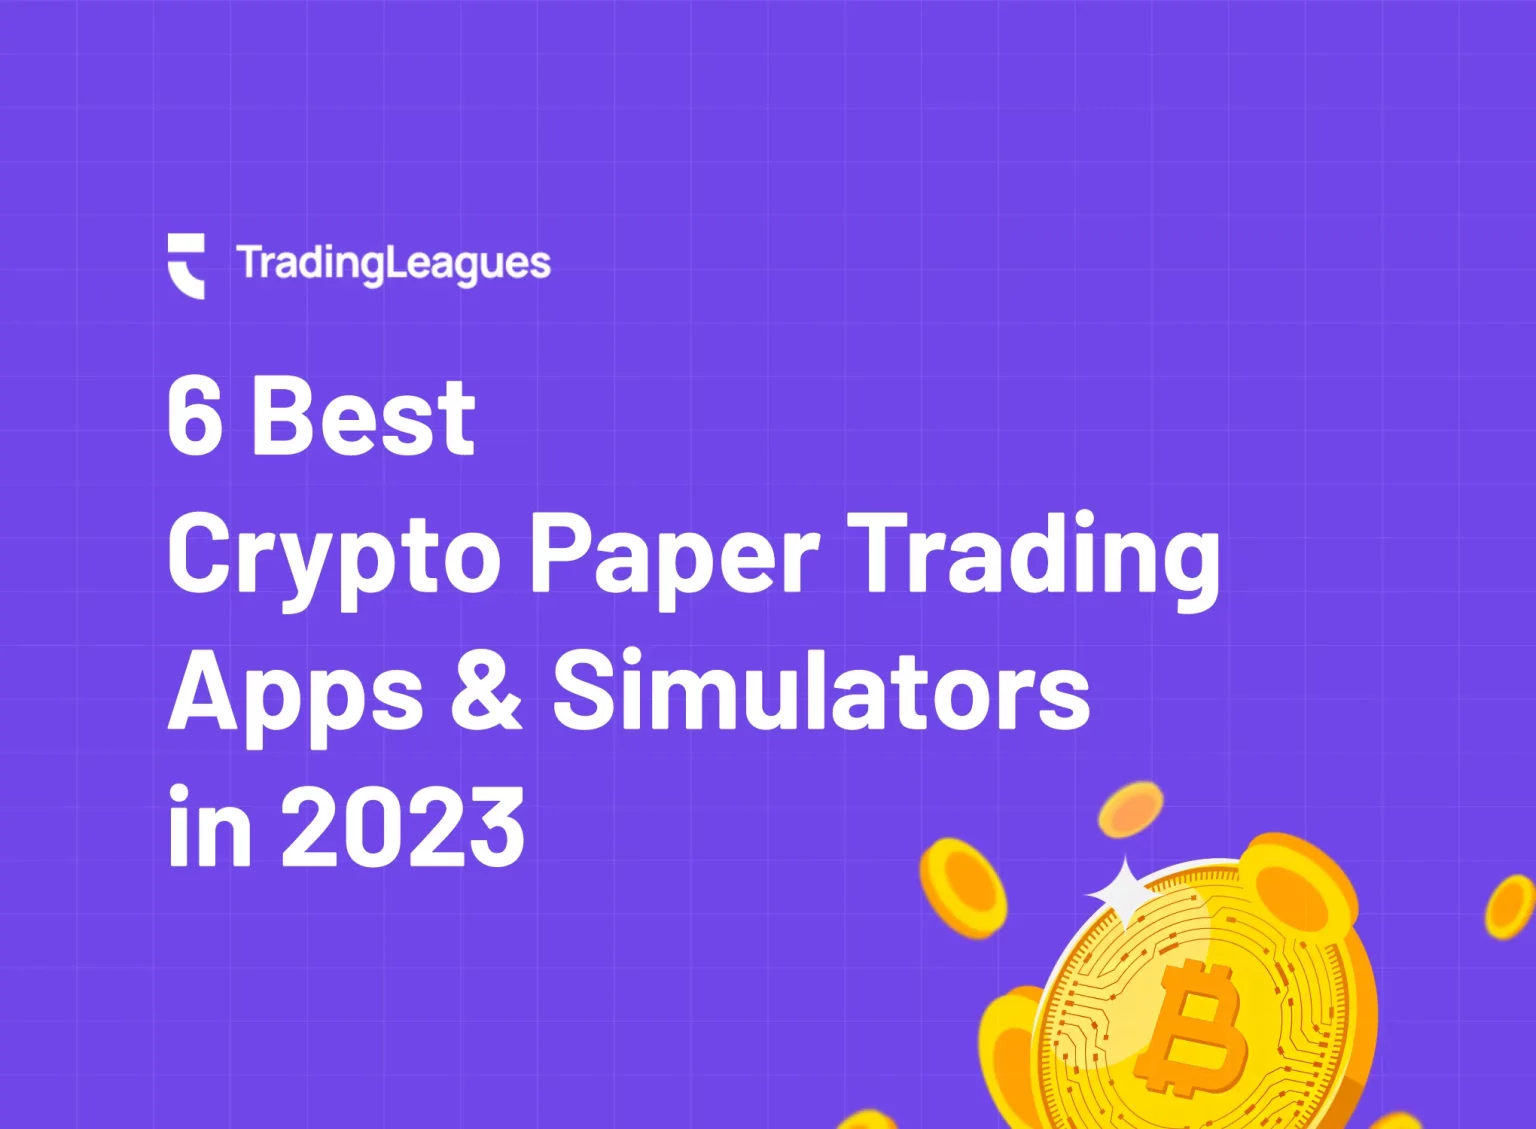 You can polish your crypto trading skills minus wagering actual money with the best paper trading apps and simulators listed here.